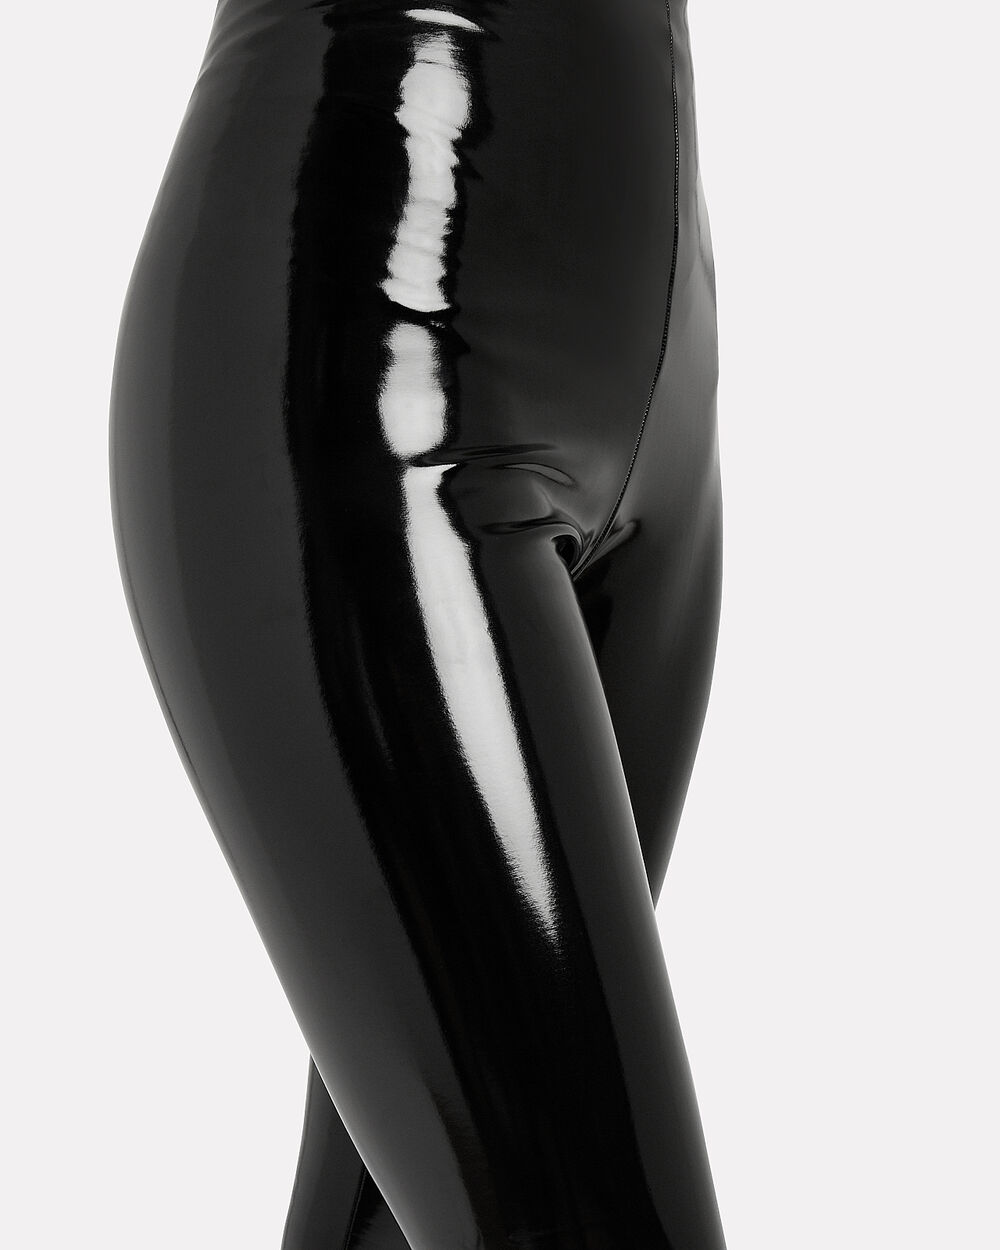 Commando Faux Patent Leather Legging with Perfect Control - SLG25 